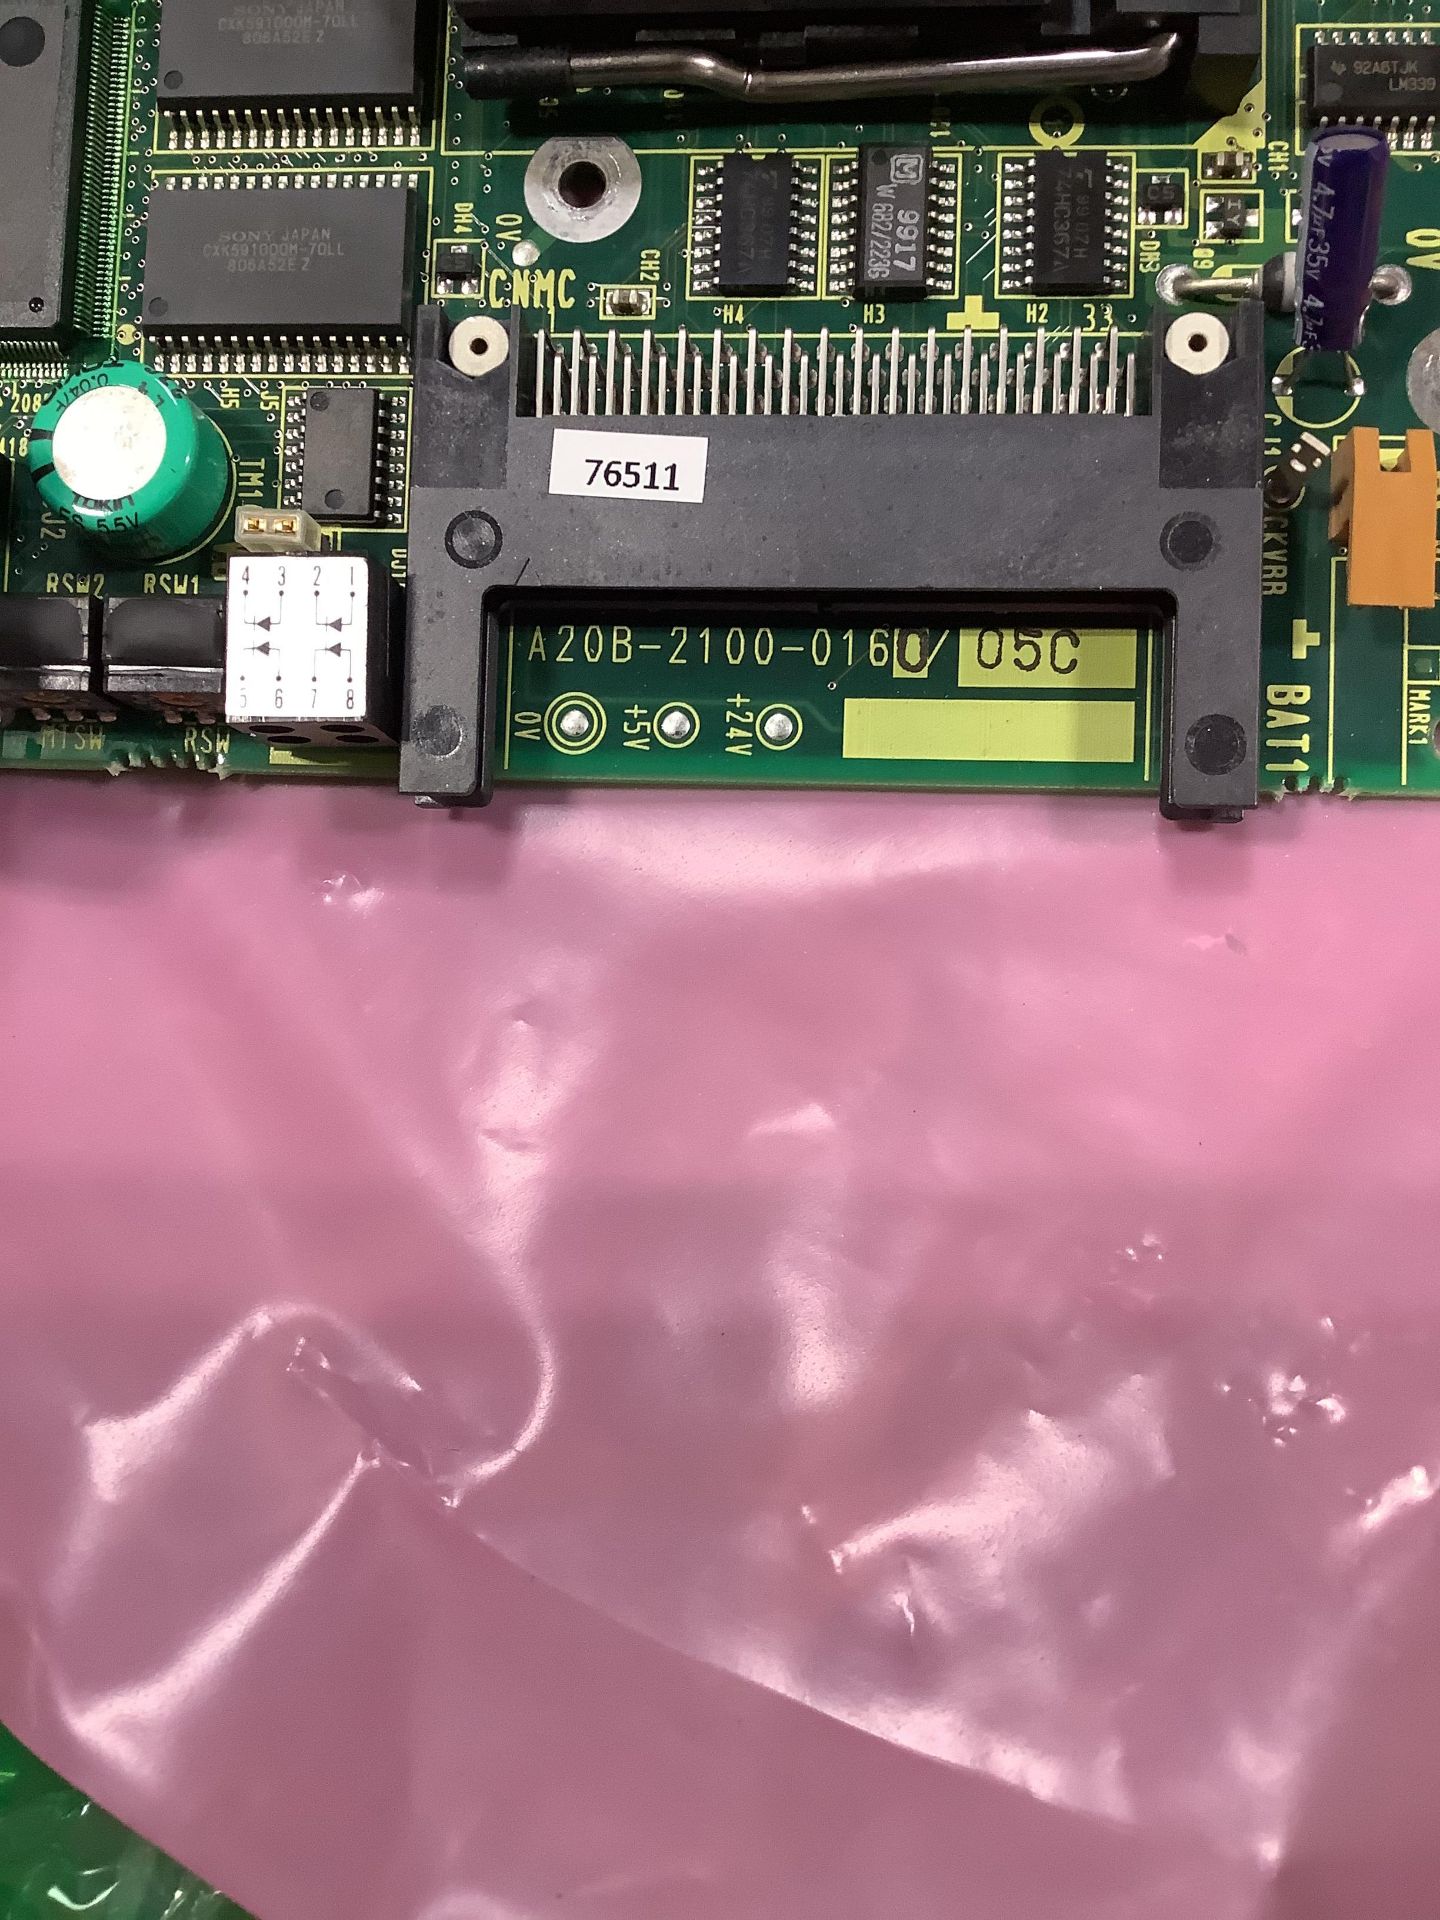 NEW Fanuc A20B-2100-0160/05C Power Mate PC Board - Image 2 of 2